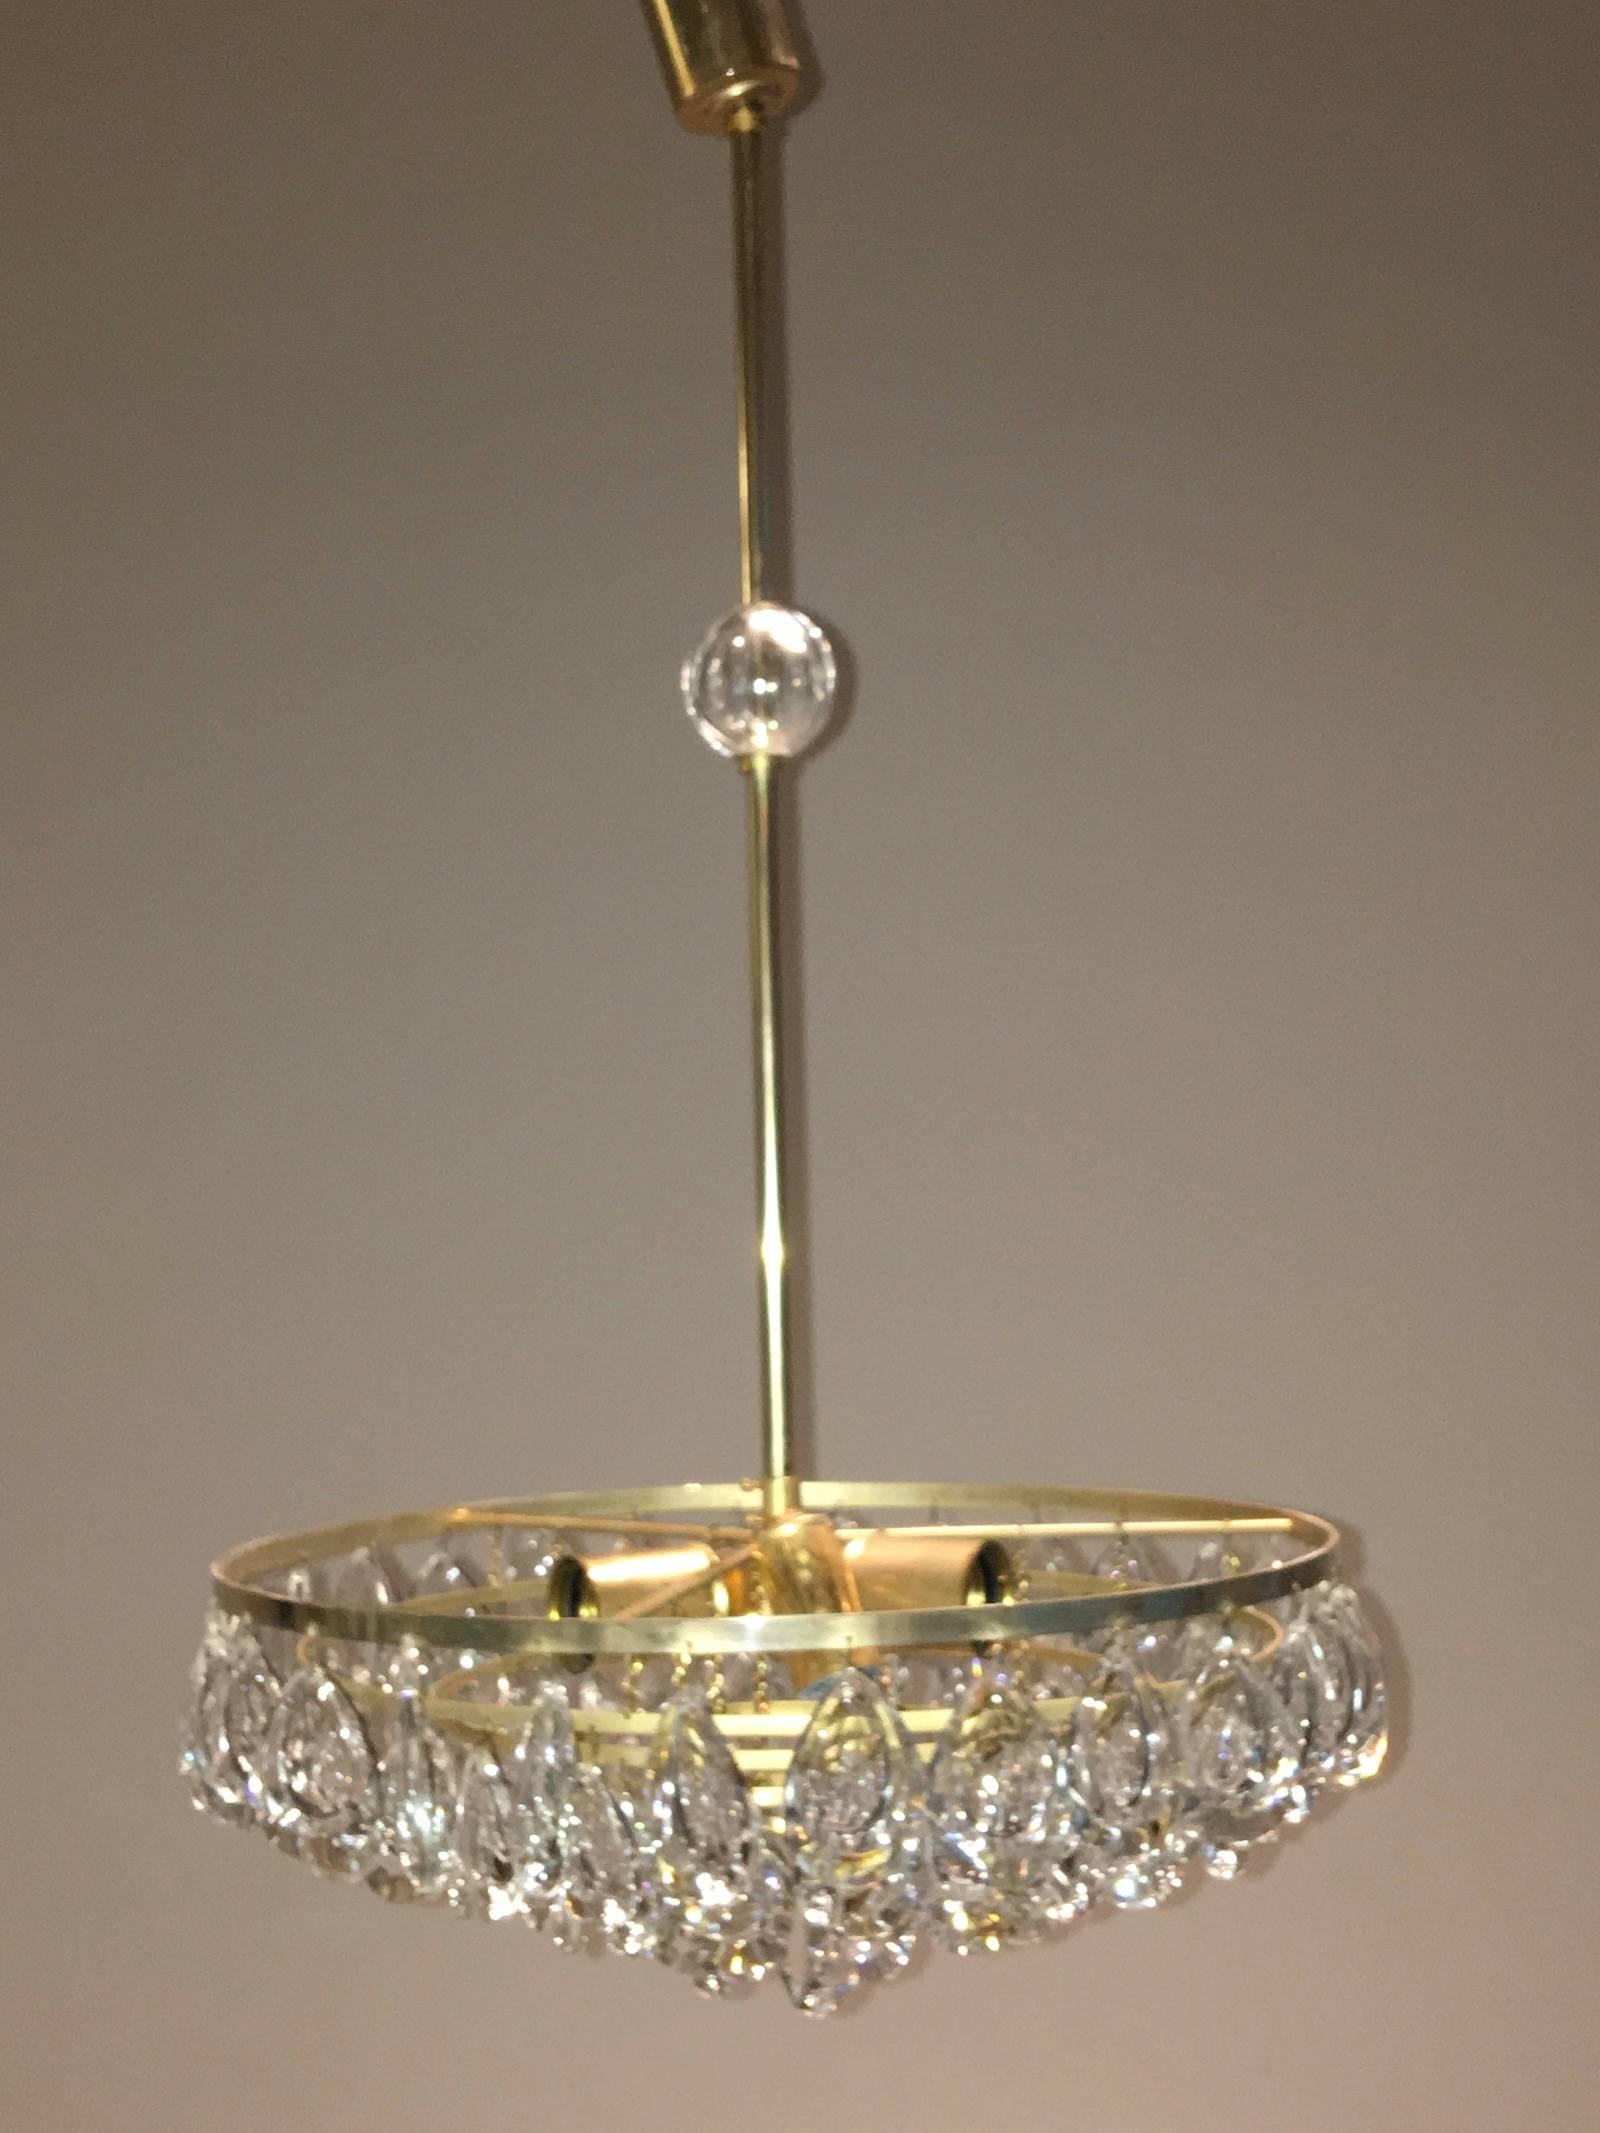 A German teardrop crystal glass chandelier by Palwa
The fixture requires three European E 27 Edison bulbs and one E 14 candelabra bulb, each bulb up to 40 watts.
Note: With minor signs of wear as expected with age and use, also slight wear to the